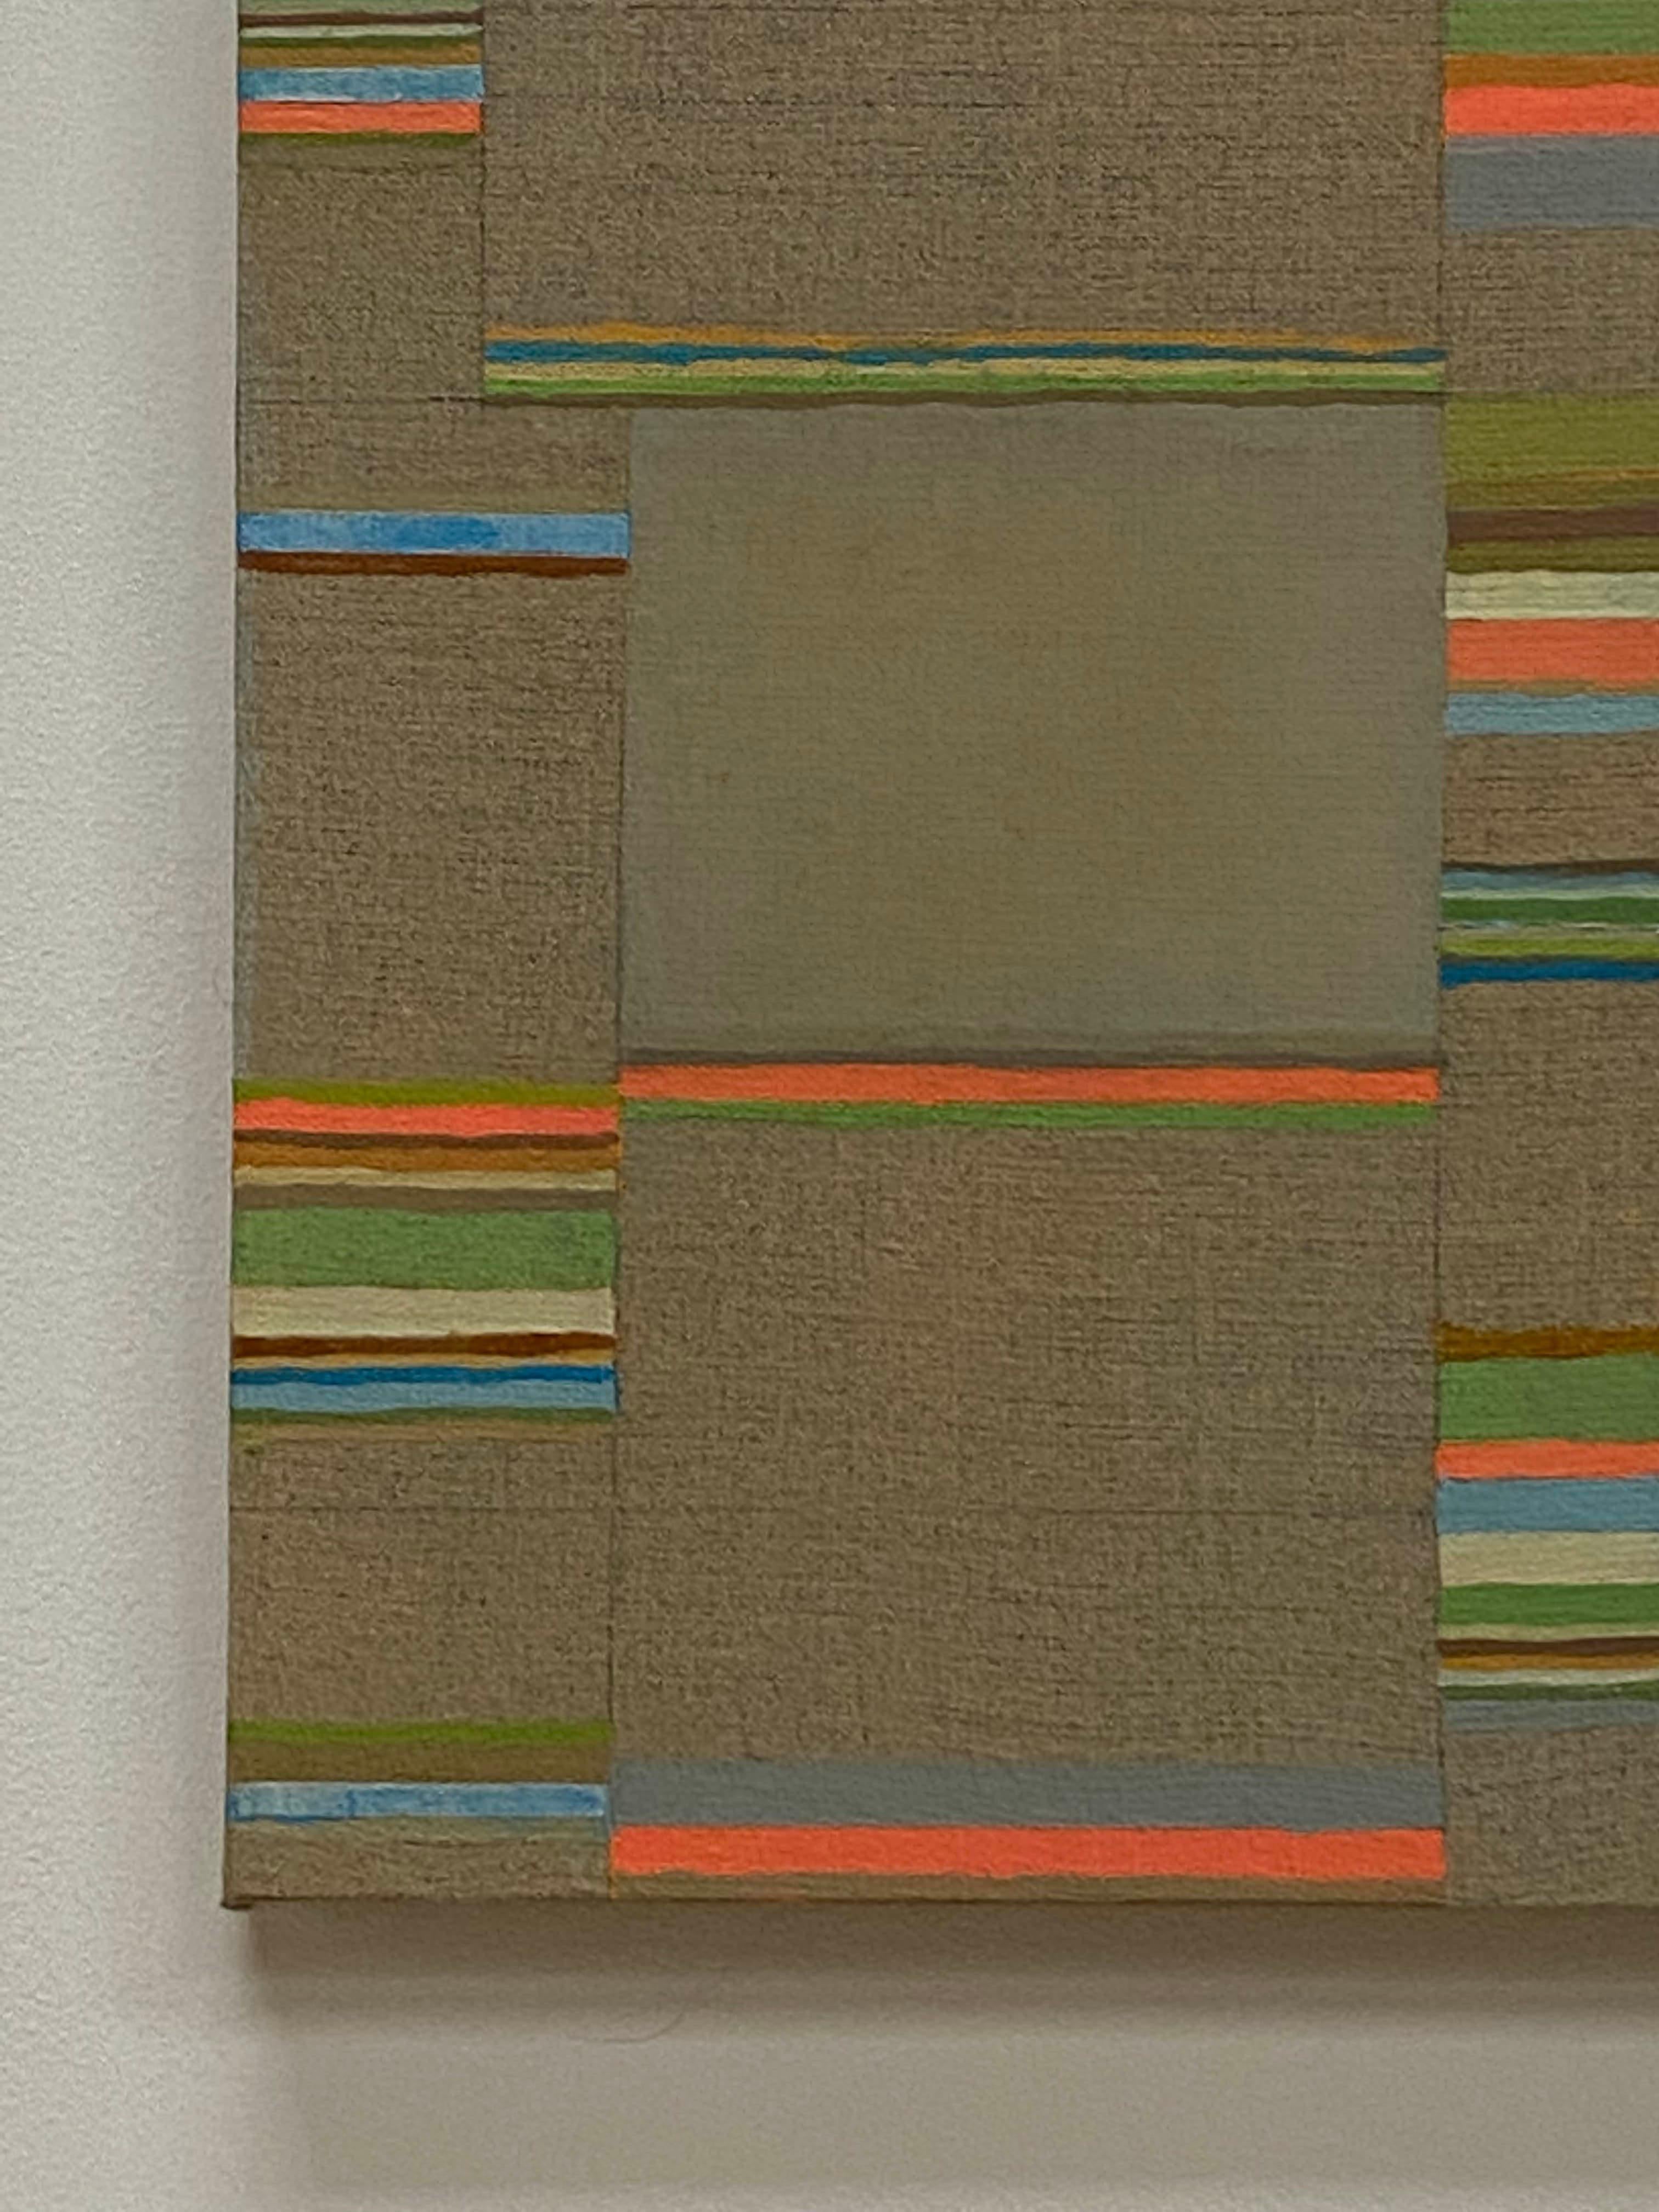 In this abstract painting in flashe on linen mounted on panel by Elizabeth Gourlay, carefully ordered stripes in shades of peach, light blue, olive, gray, green, and brown are vibrant against the warm, earthy brown linen surface. Signed, dated and